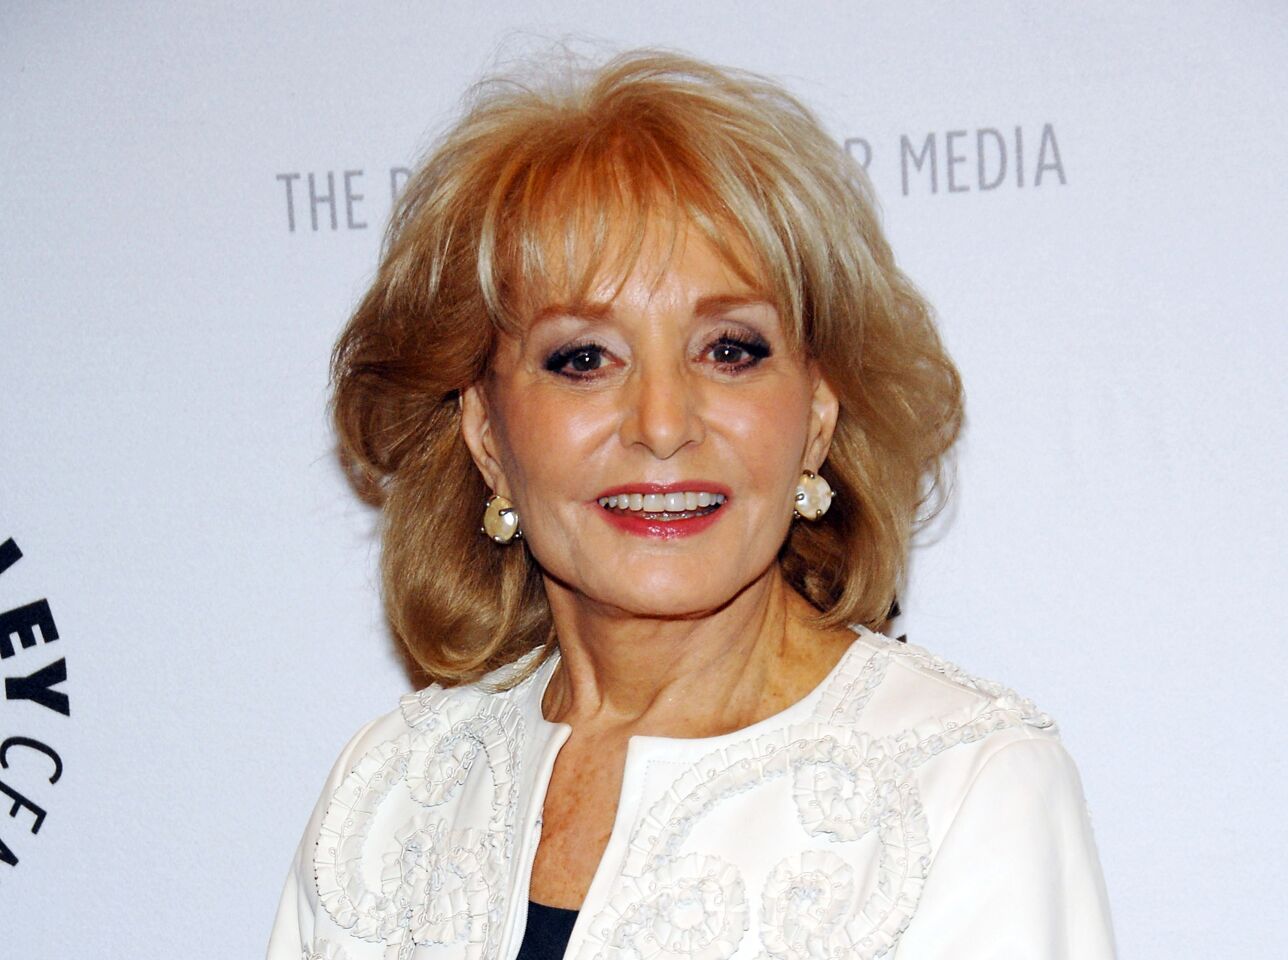 Barbara Walters, an anchor and program host who blazed the way as the first woman to become a TV news superstar, died at 93. Walters was an aggressive practitioner of “the get” who outmaneuvered competitors to land exclusives with figures as varied as Cuban leader Fidel Castro and Monica Lewinsky. Late in her career, Walters created “The View,” a daytime talk show that gave her another another prominent perch. But Walters was perhaps most familiar to viewers with her “Barbara Walters Specials.”